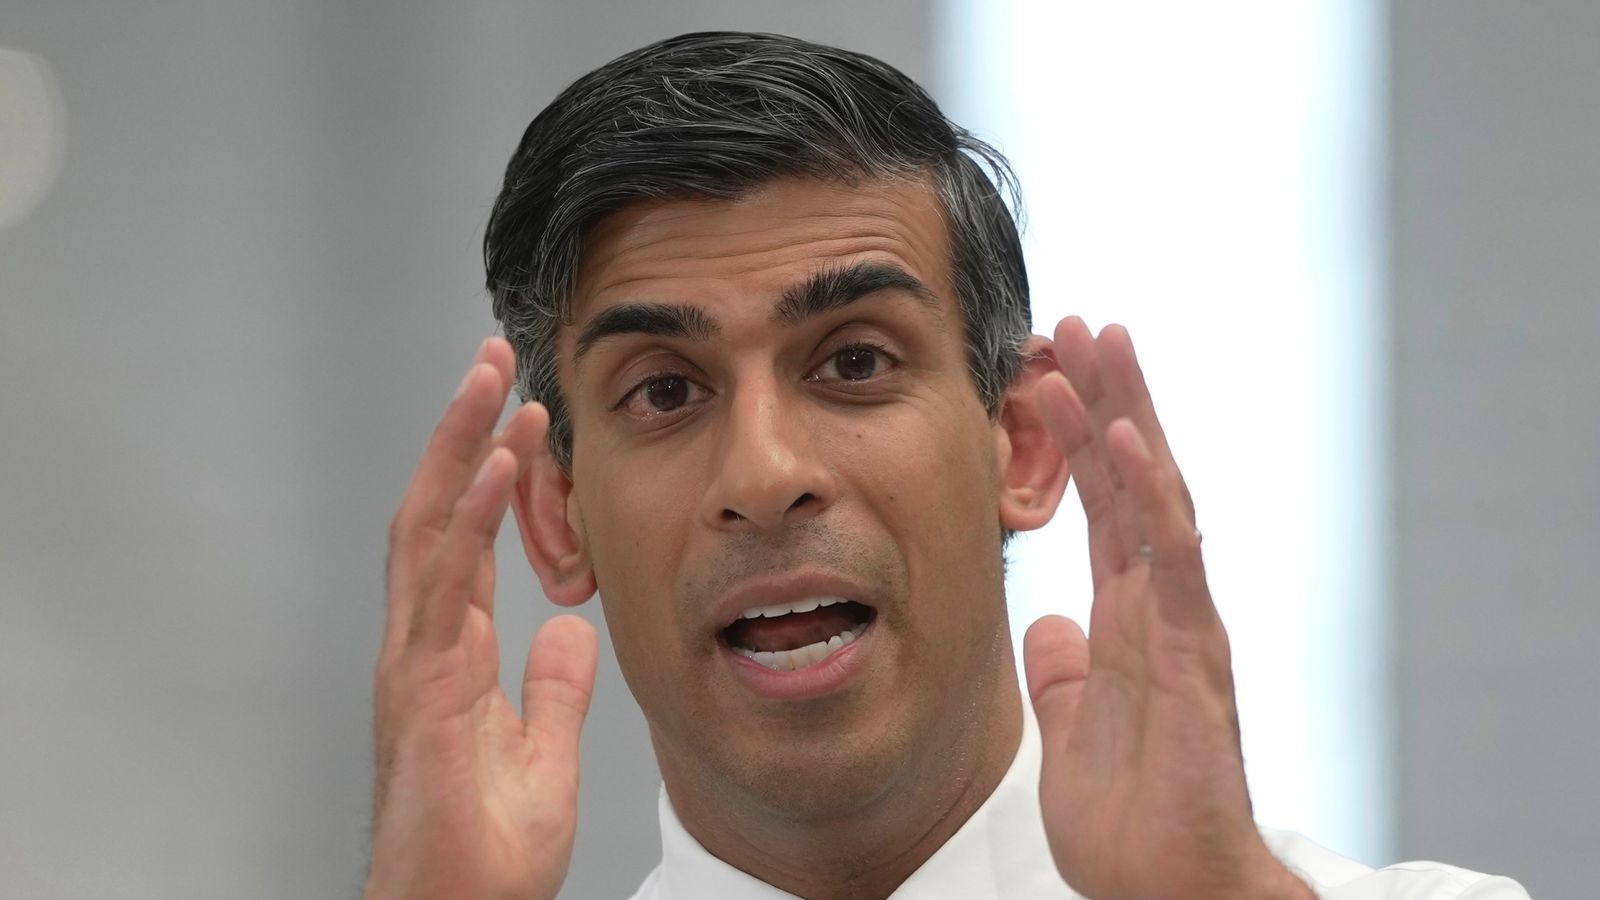 Rishi Sunak's corporate tone on inflation risks alienating voters - who just want to know how they'll pay the bills